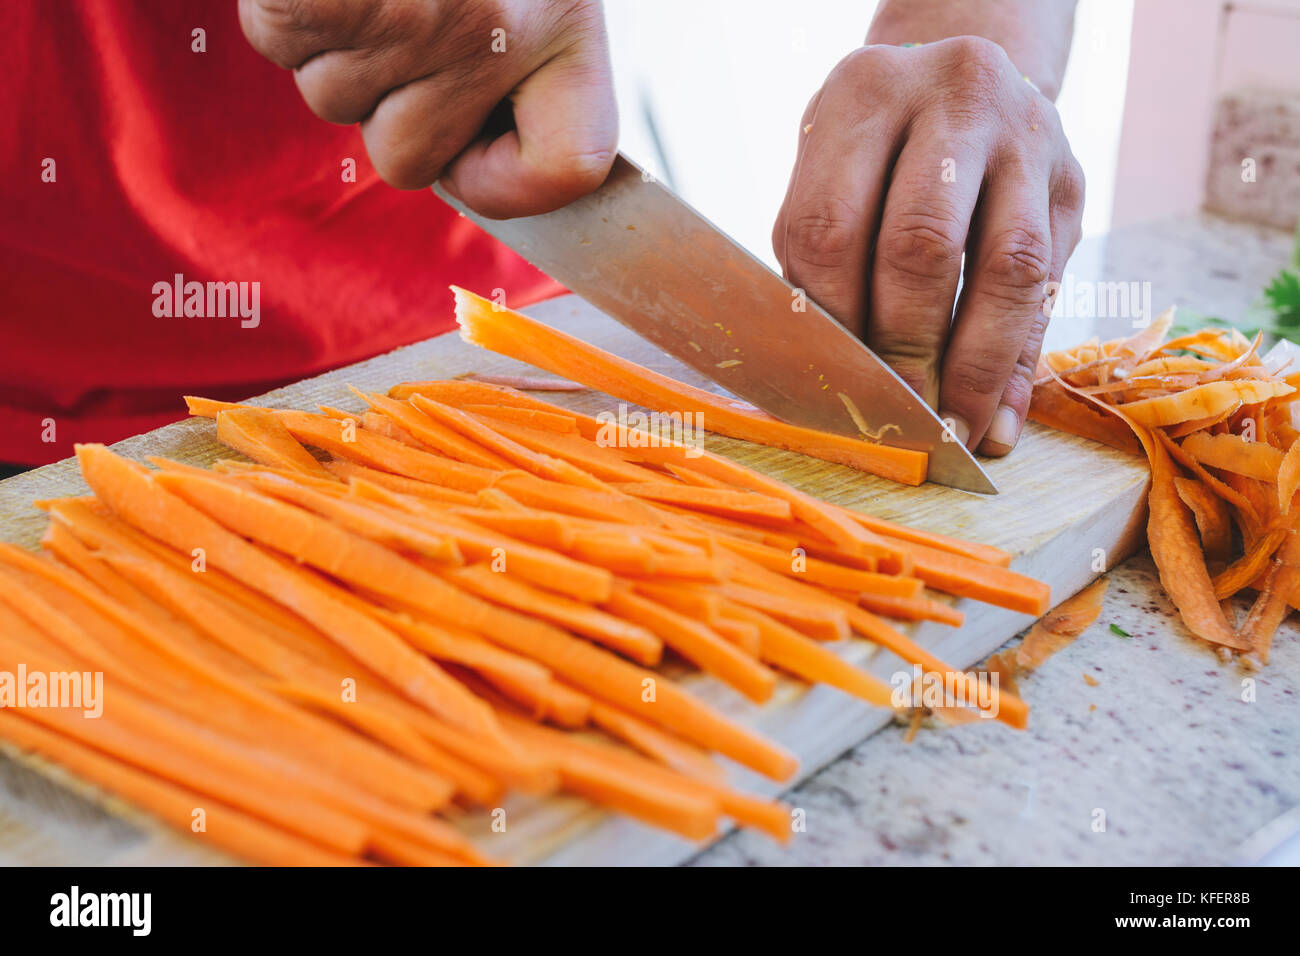 man cooking, cut carrot julienne style, in the kitchen Stock Photo